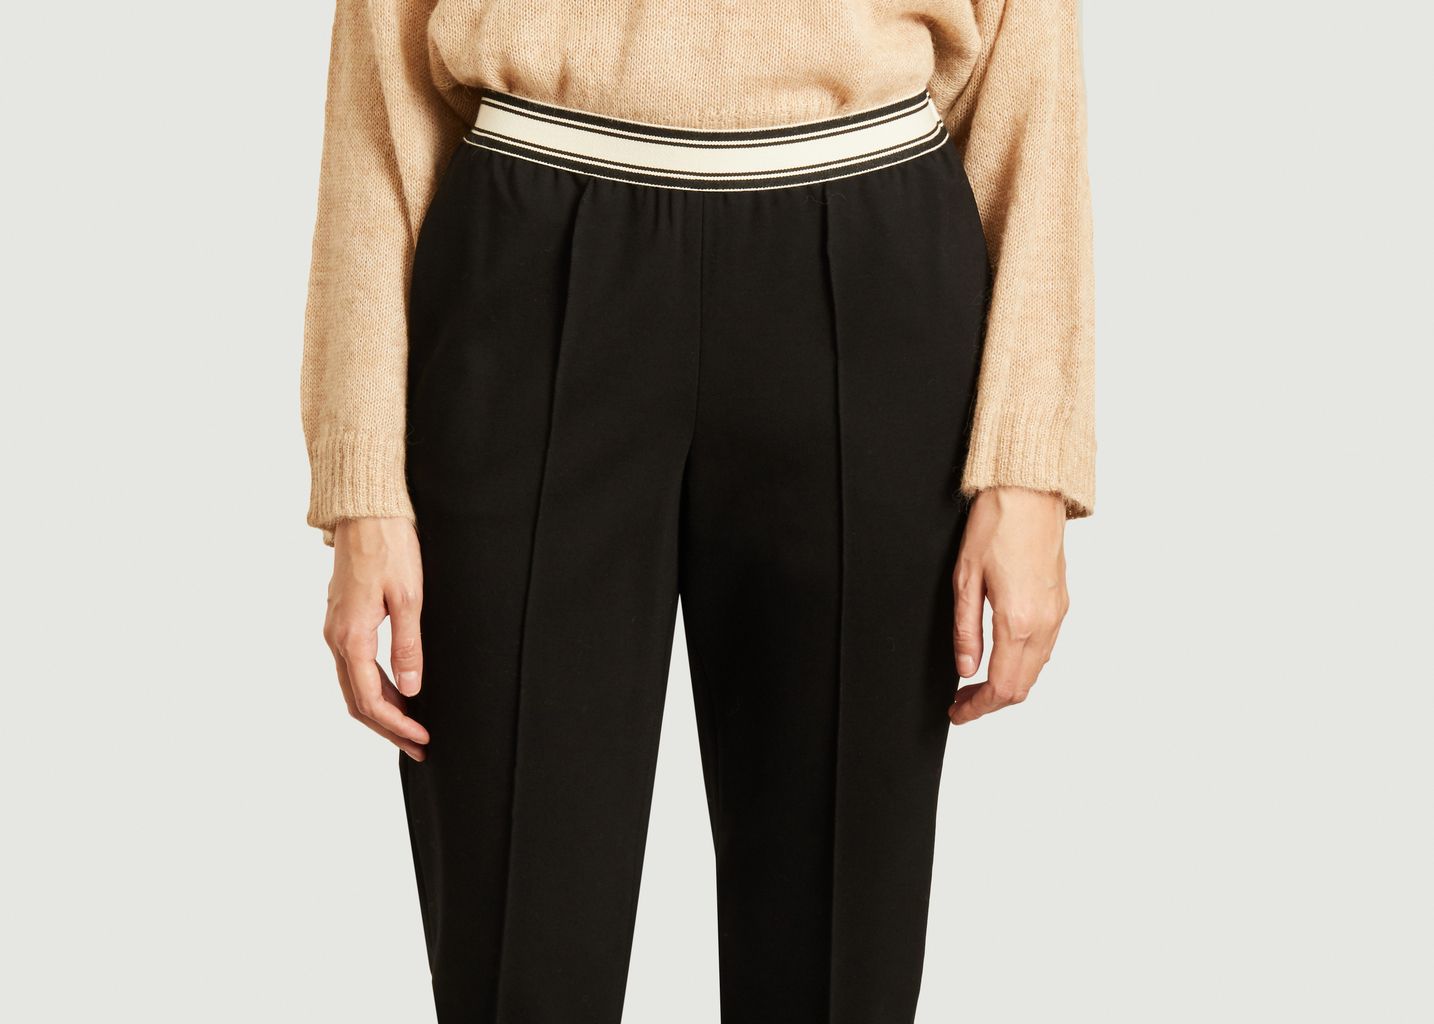 Vlad straight 7/8 trousers with elasticated waist - Bellerose